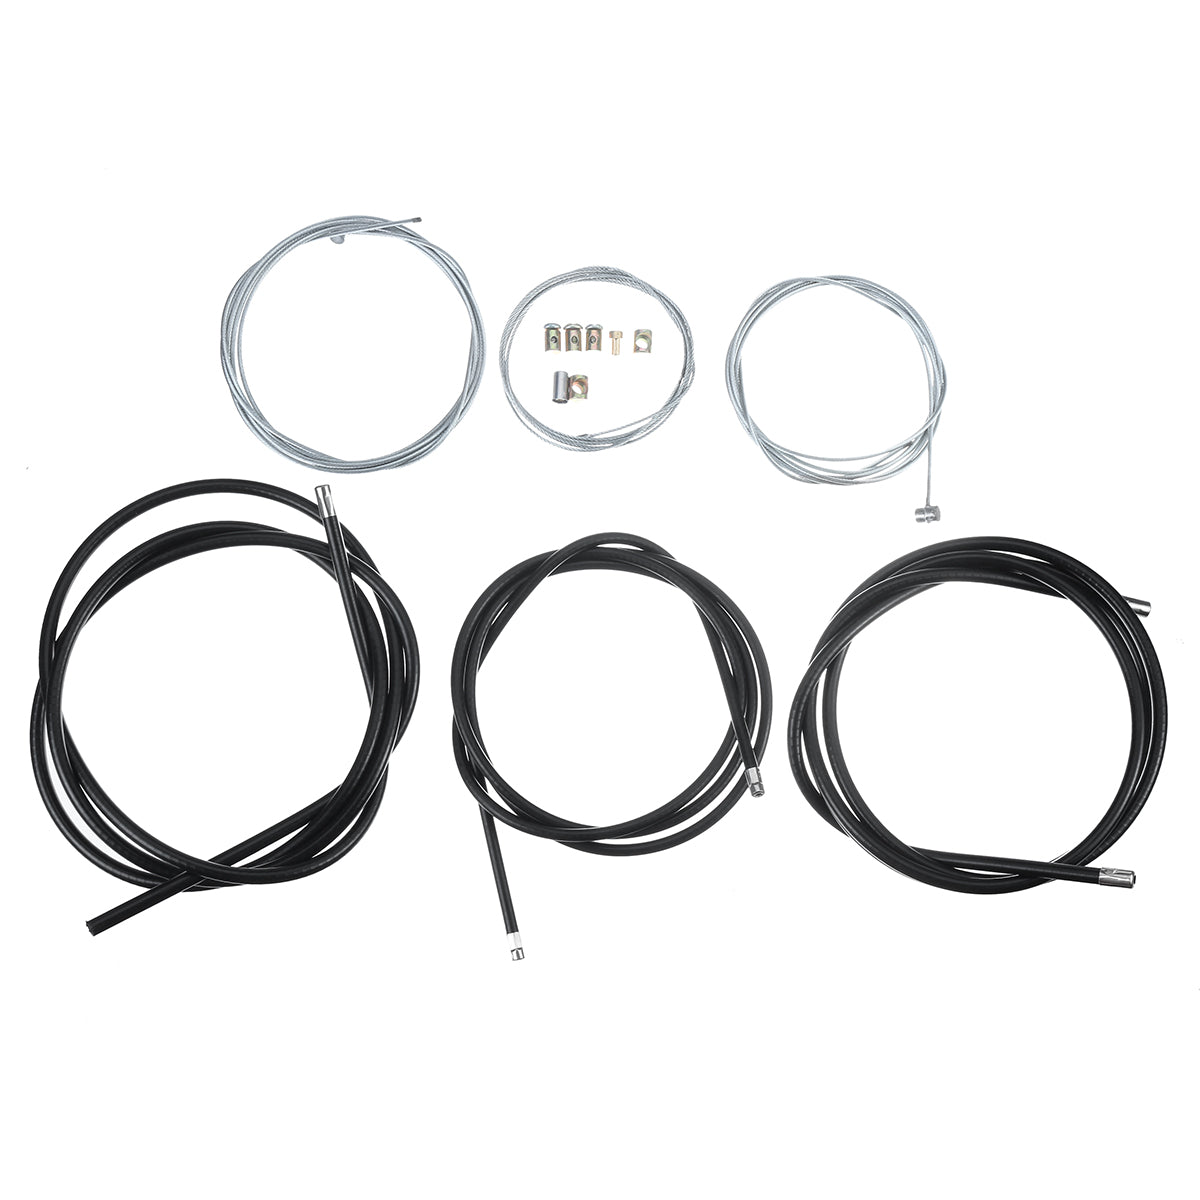 White Smoke Motorcycle Clutch Brake Throttle Cable Accessories Kit Universal